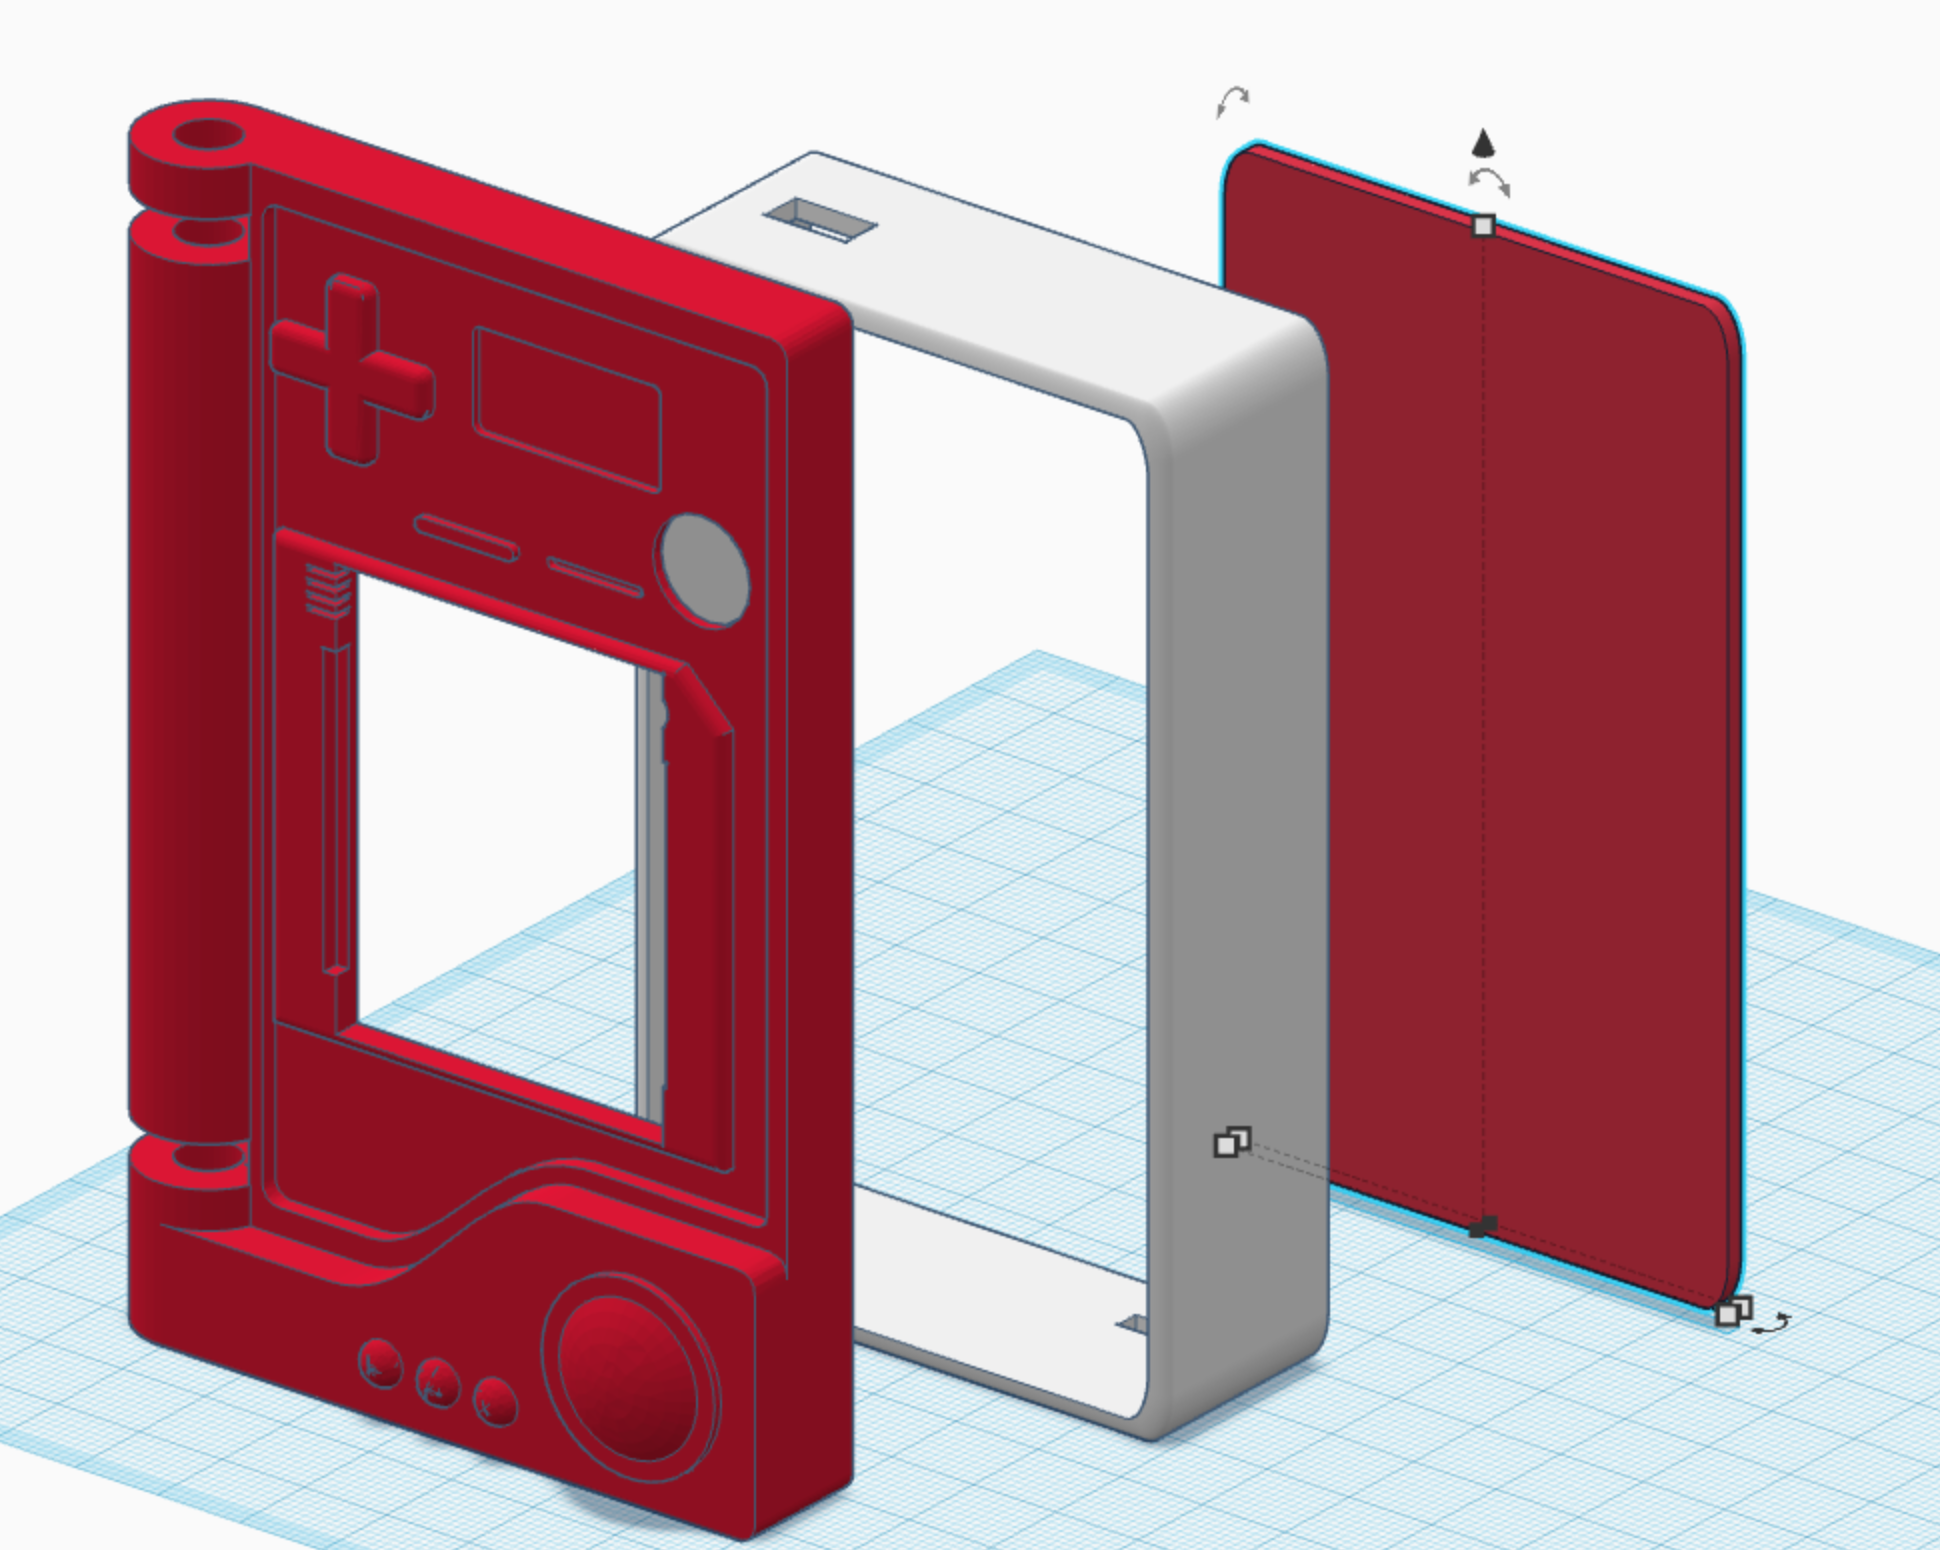 The updated Pokédex model in Tinkercad